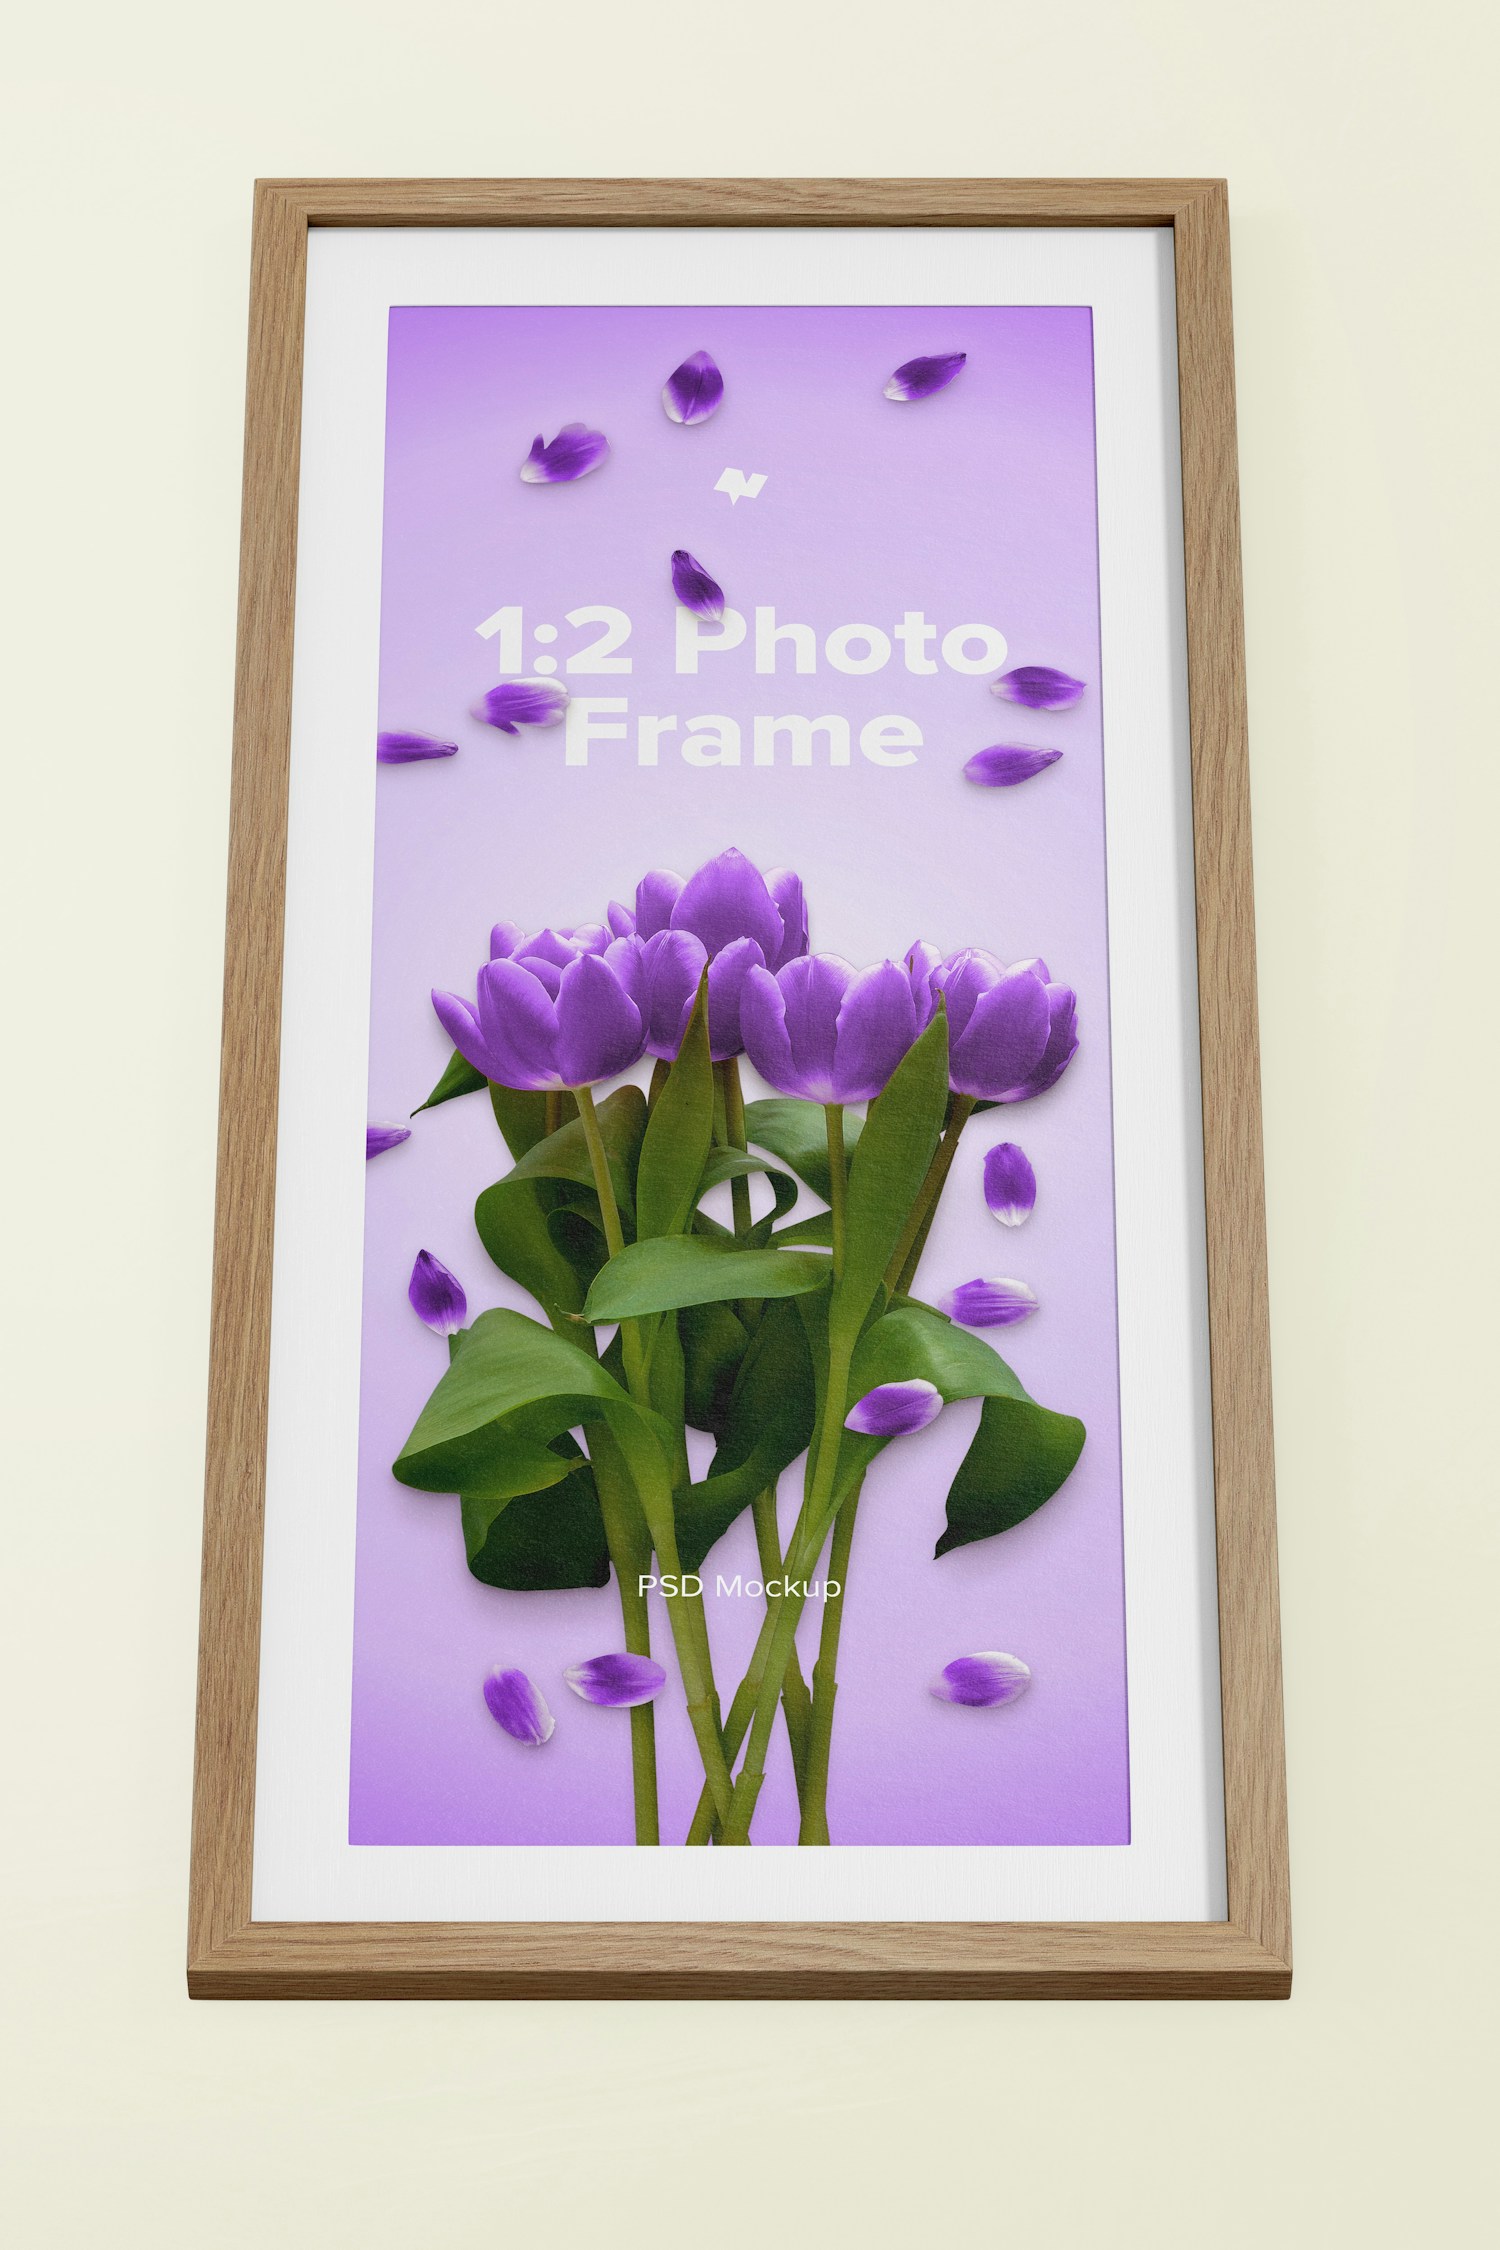 1:2 Photo Frame Mockup, Bottom Front View